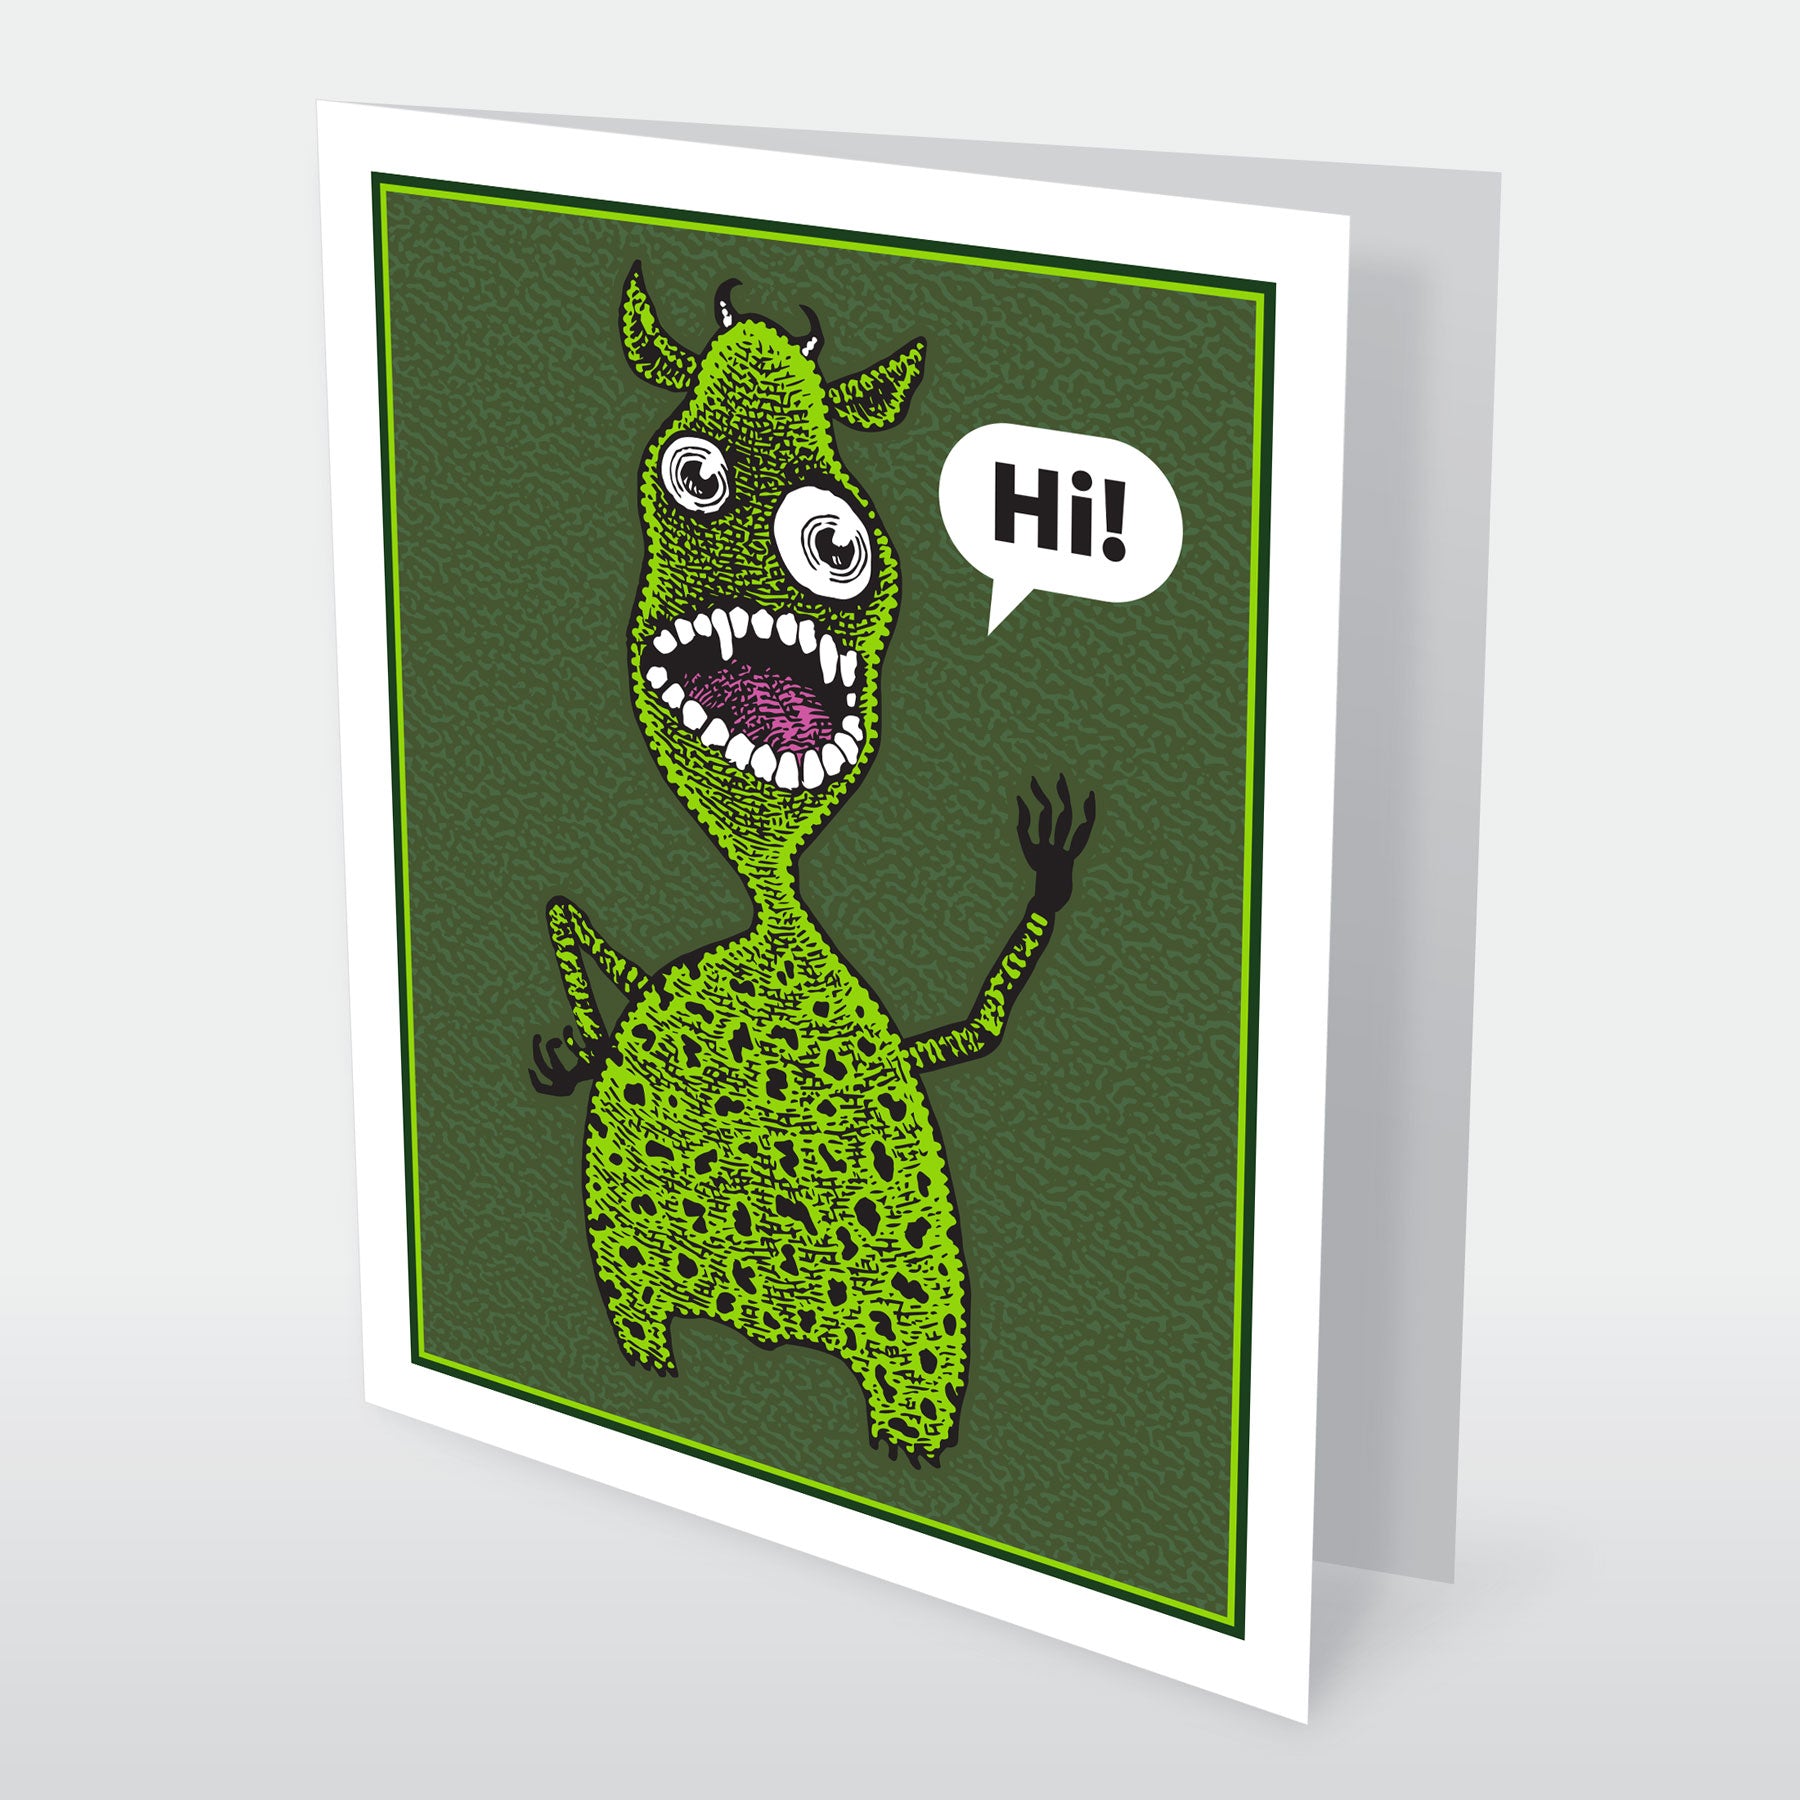 Street Art Monster Sticker for Sale by fromthepage